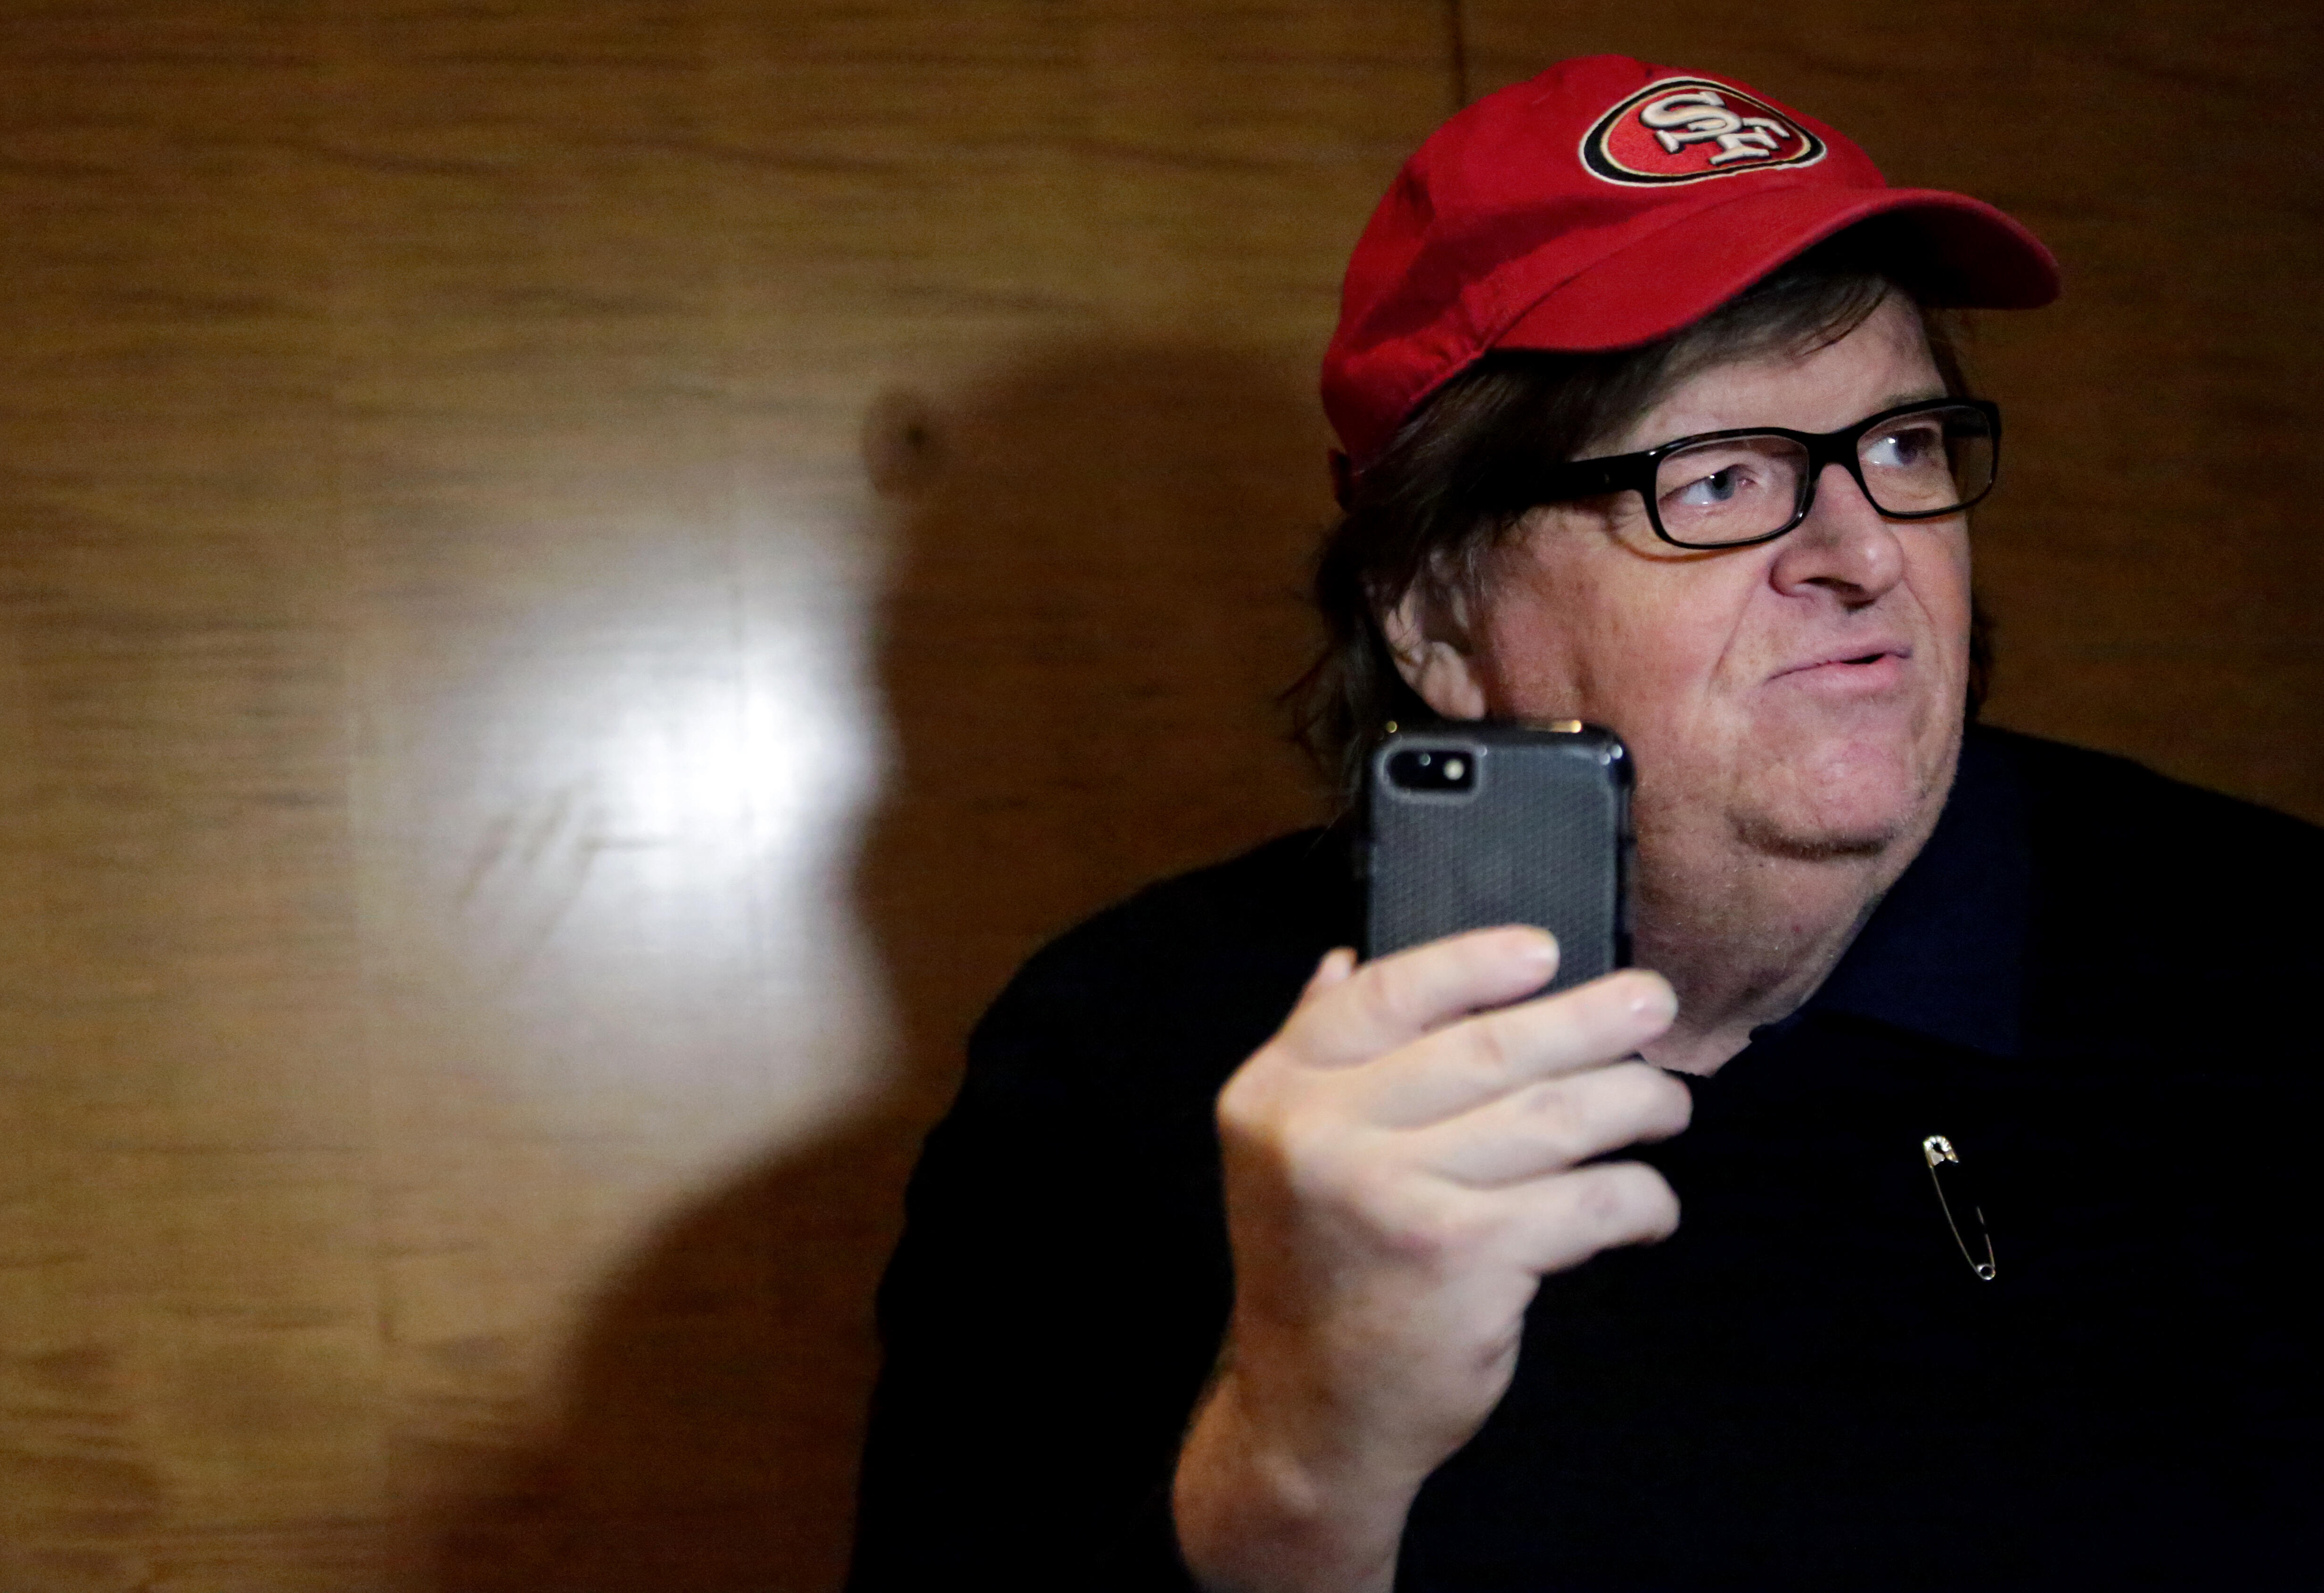 NEW YORK, NY - NOVEMBER 12: Filmmaker Michael Moore films himself with a smartphone at Trump Tower on November 12, 2016 in New York City. President-elect Donald Trump is holding meetings at his Trump Tower residence amid increased security in the area.  (